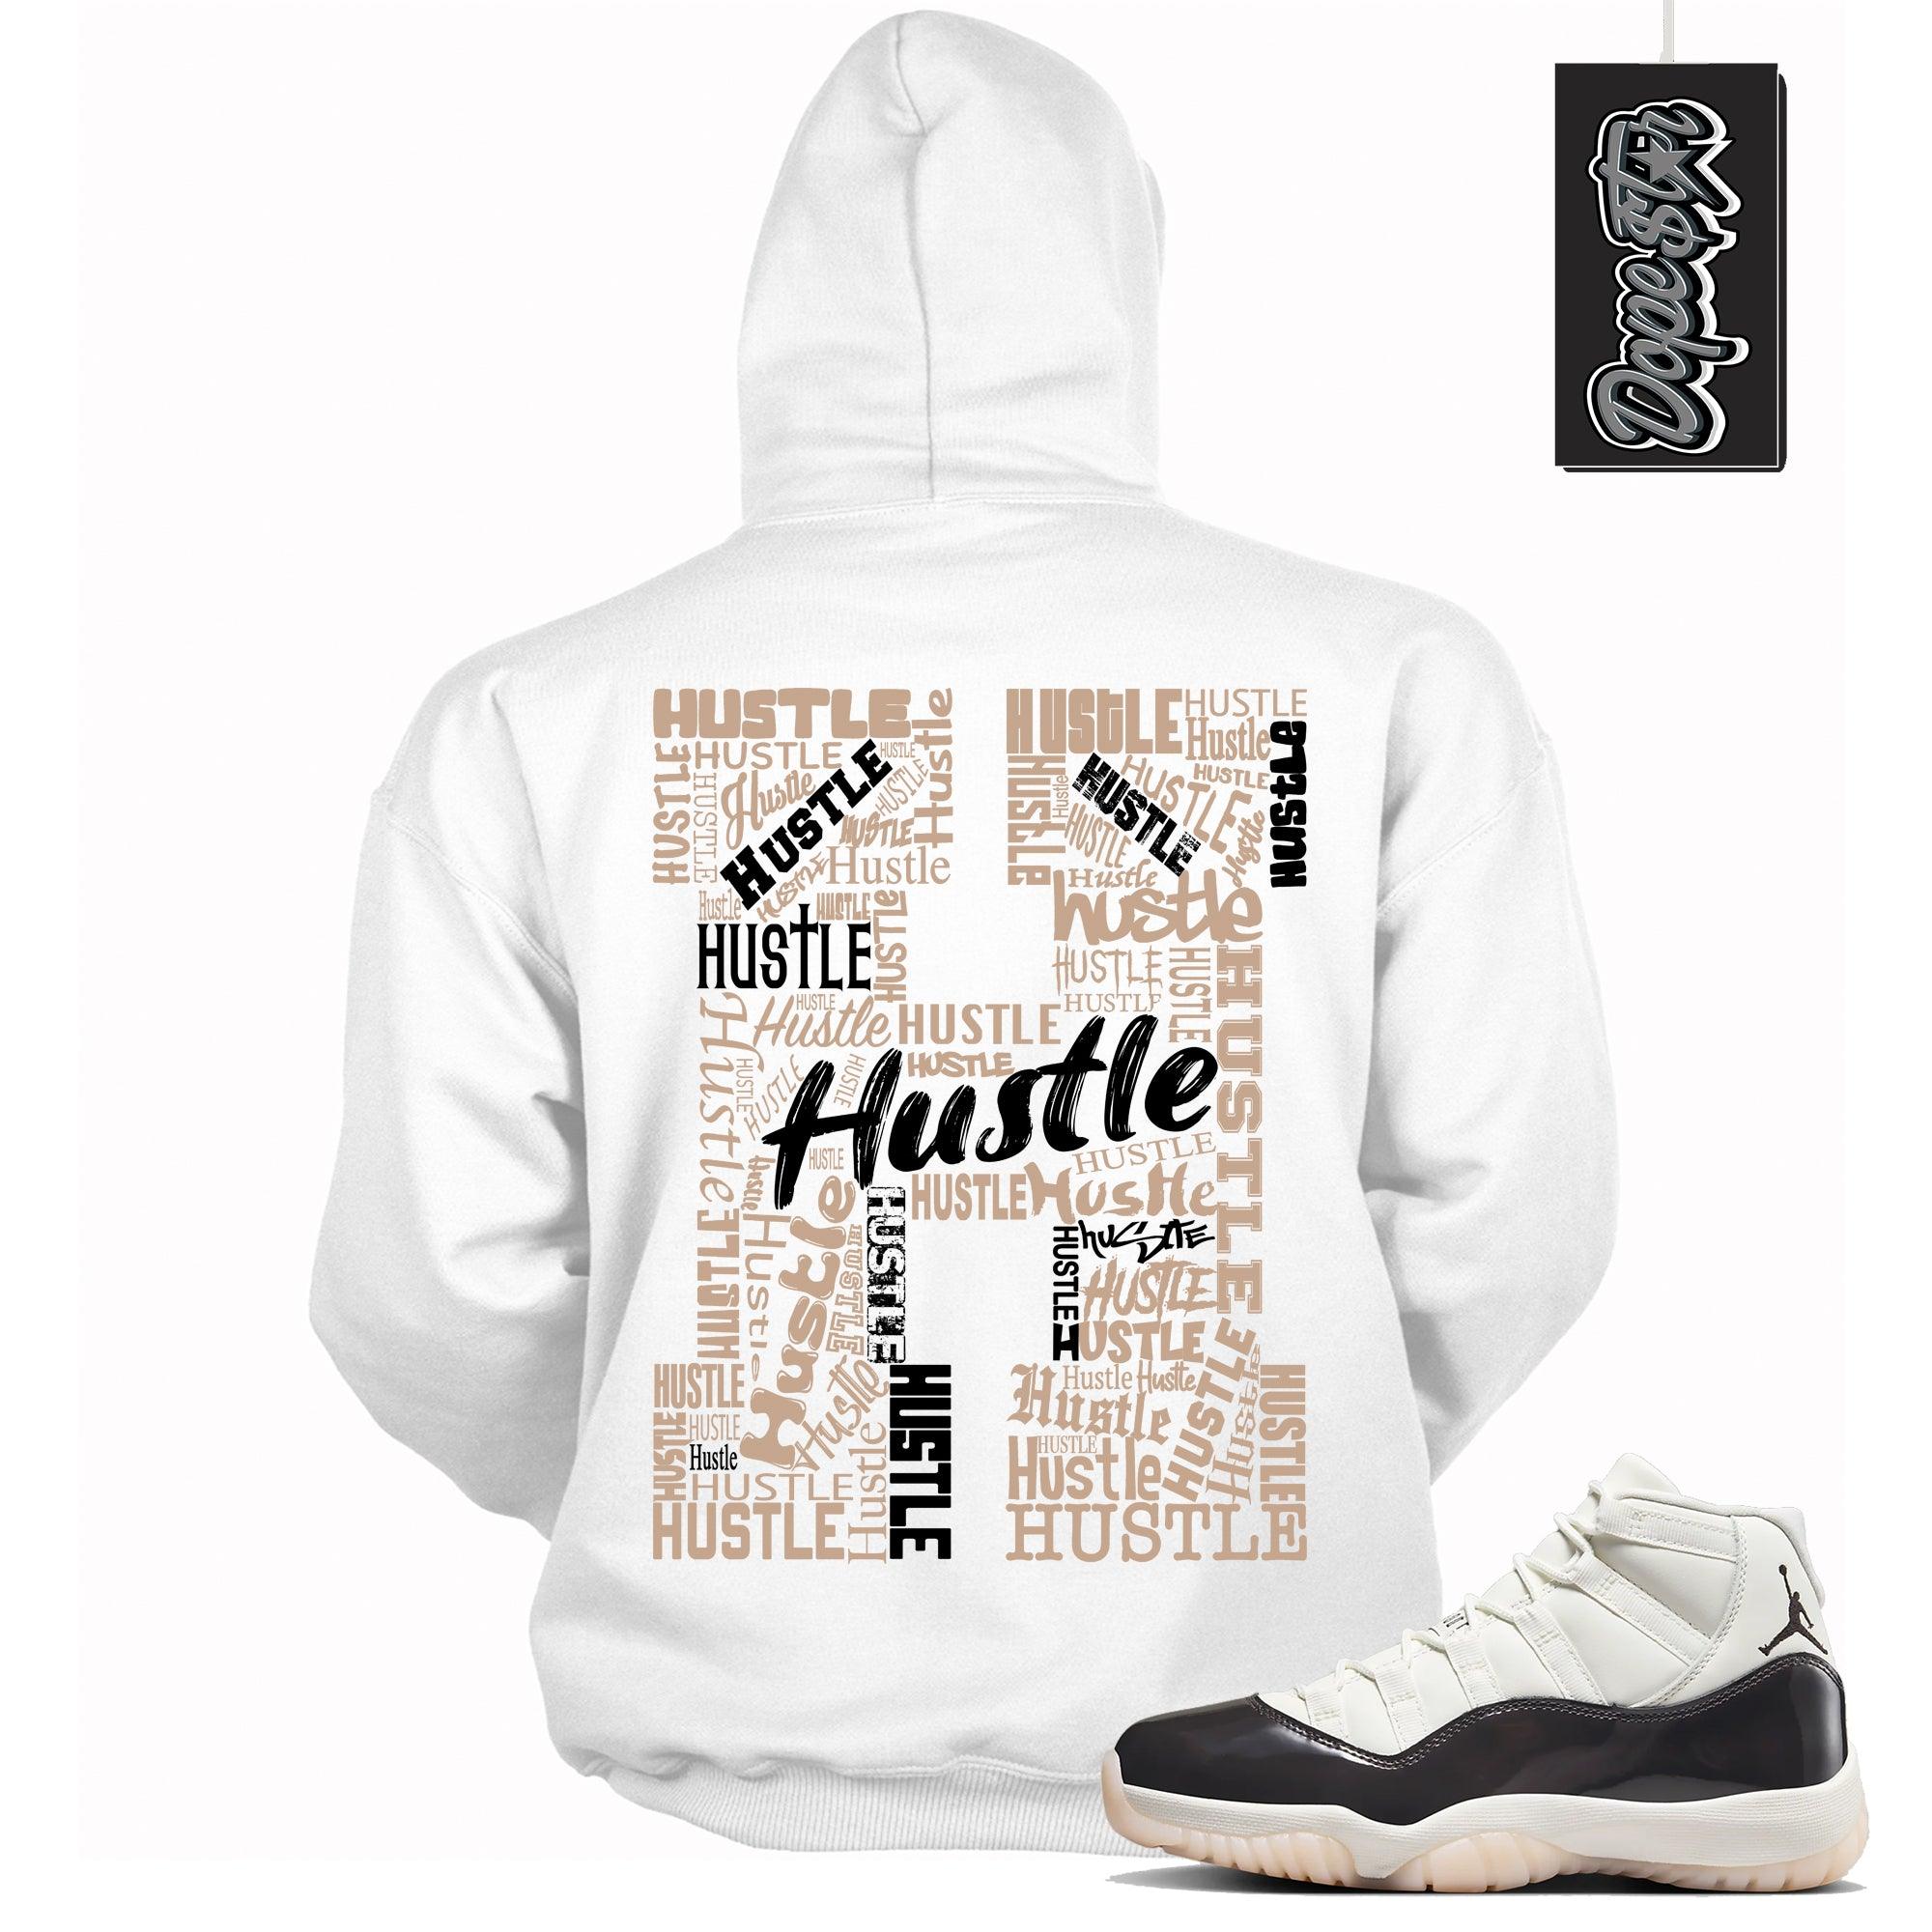 Cool White Graphic Hoodie with “ Hustle H “ print, that perfectly matches Air Jordan 11 Neapolitan sneakers